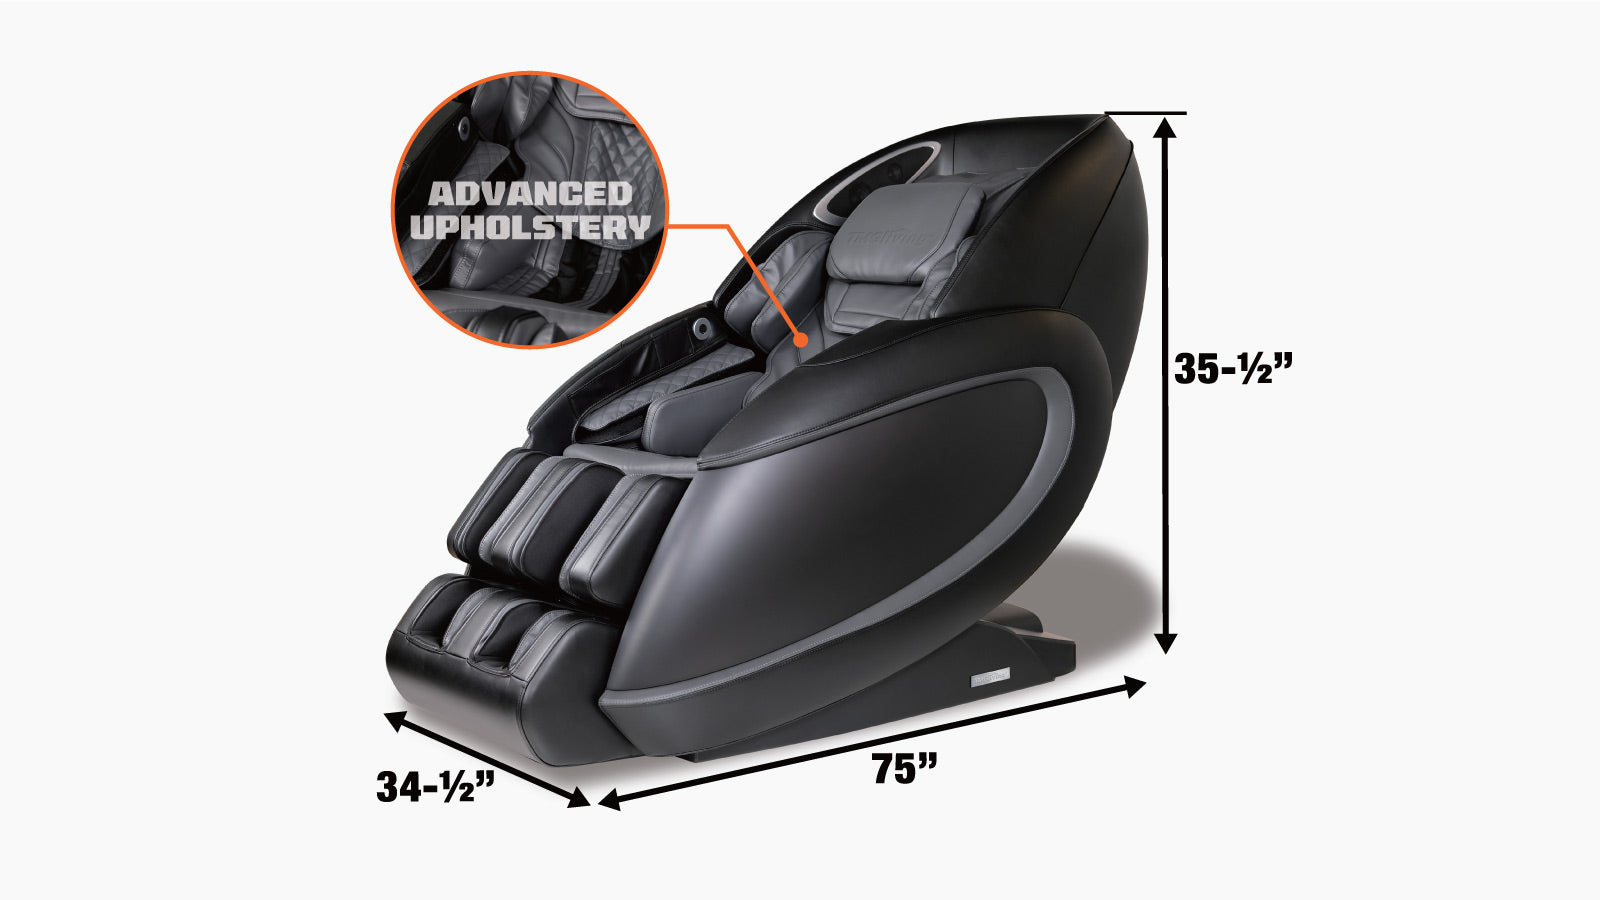 TMG Industrial Zero Gravity Multi-Function Massage Chair Platinum, 4D Mechanism, 12 Auto Programs, Touch Screen Control, Full Body Compression, Bluetooth, Body Scanning, Footrest Extension, Roller Foot Massager TMG-LMC79-specifications-image